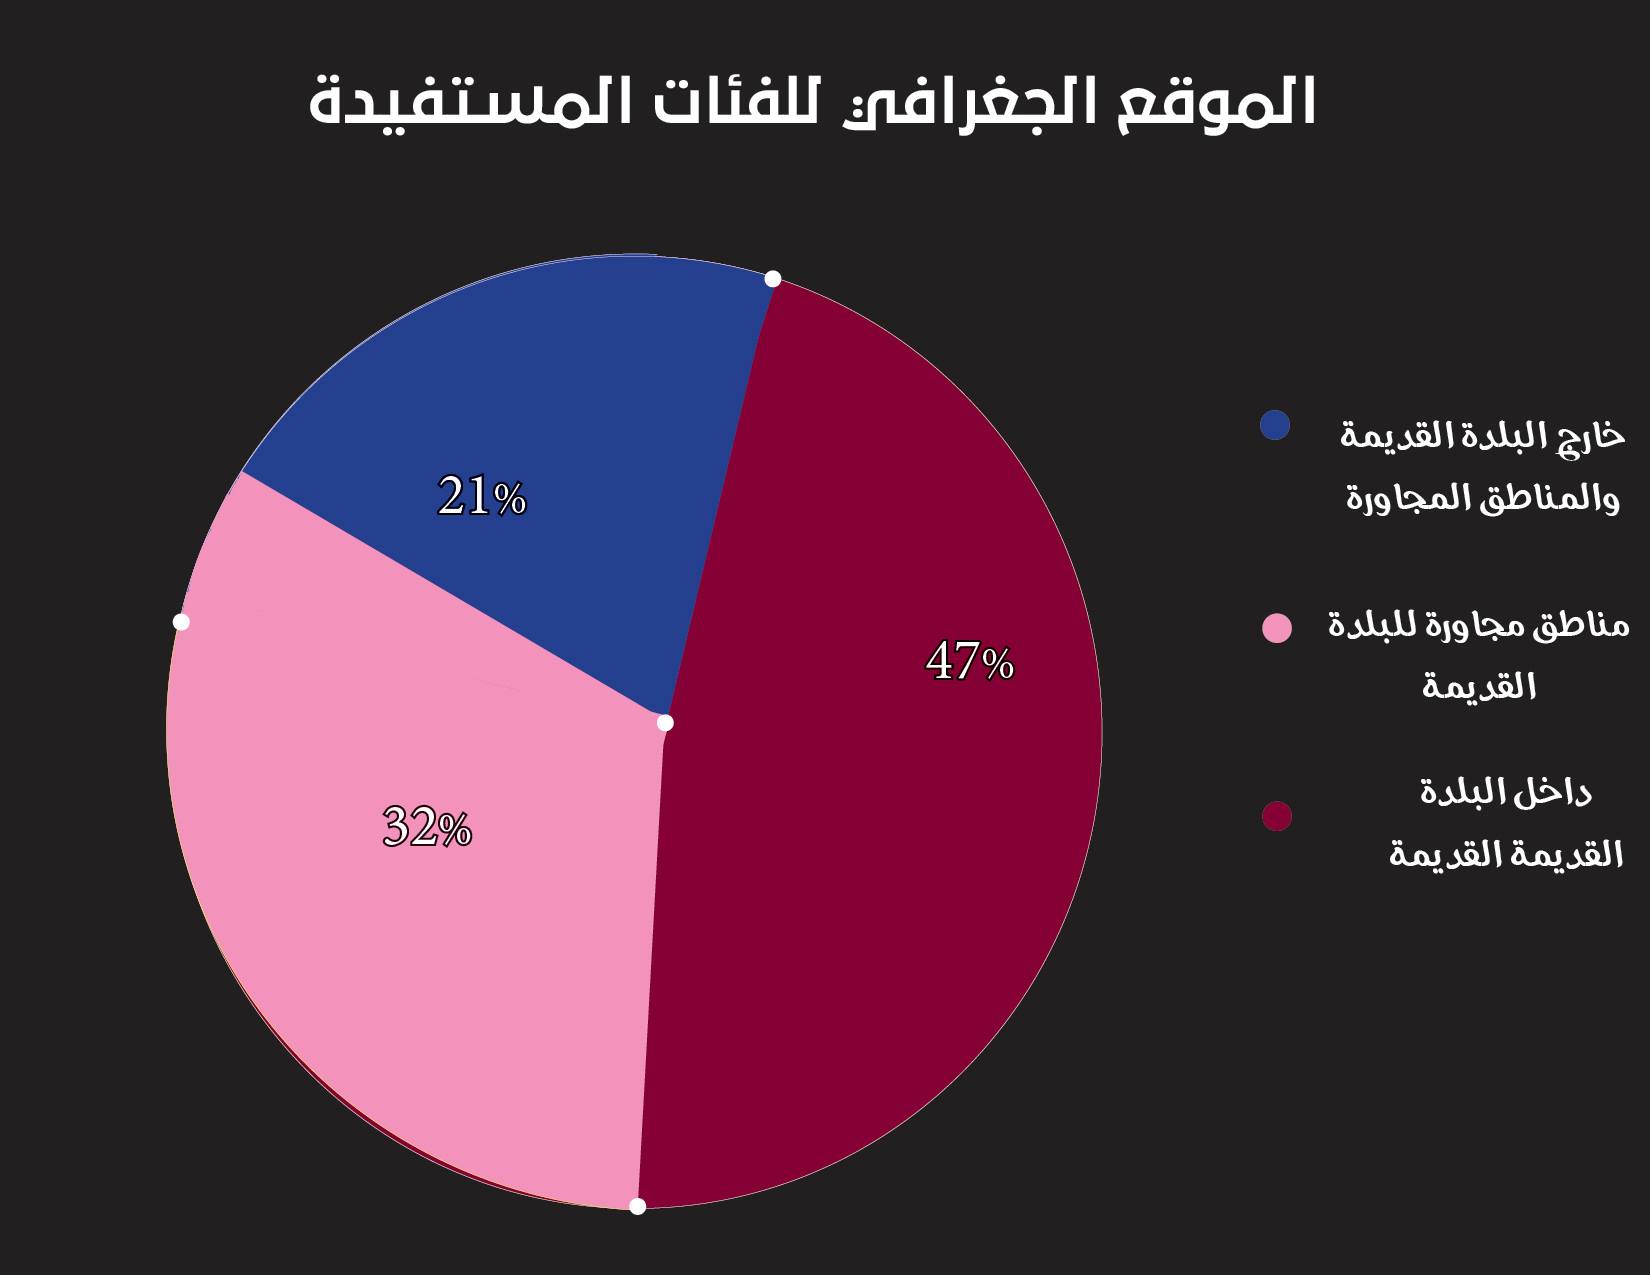 The Geographical Distribution of the Beneficiary Families